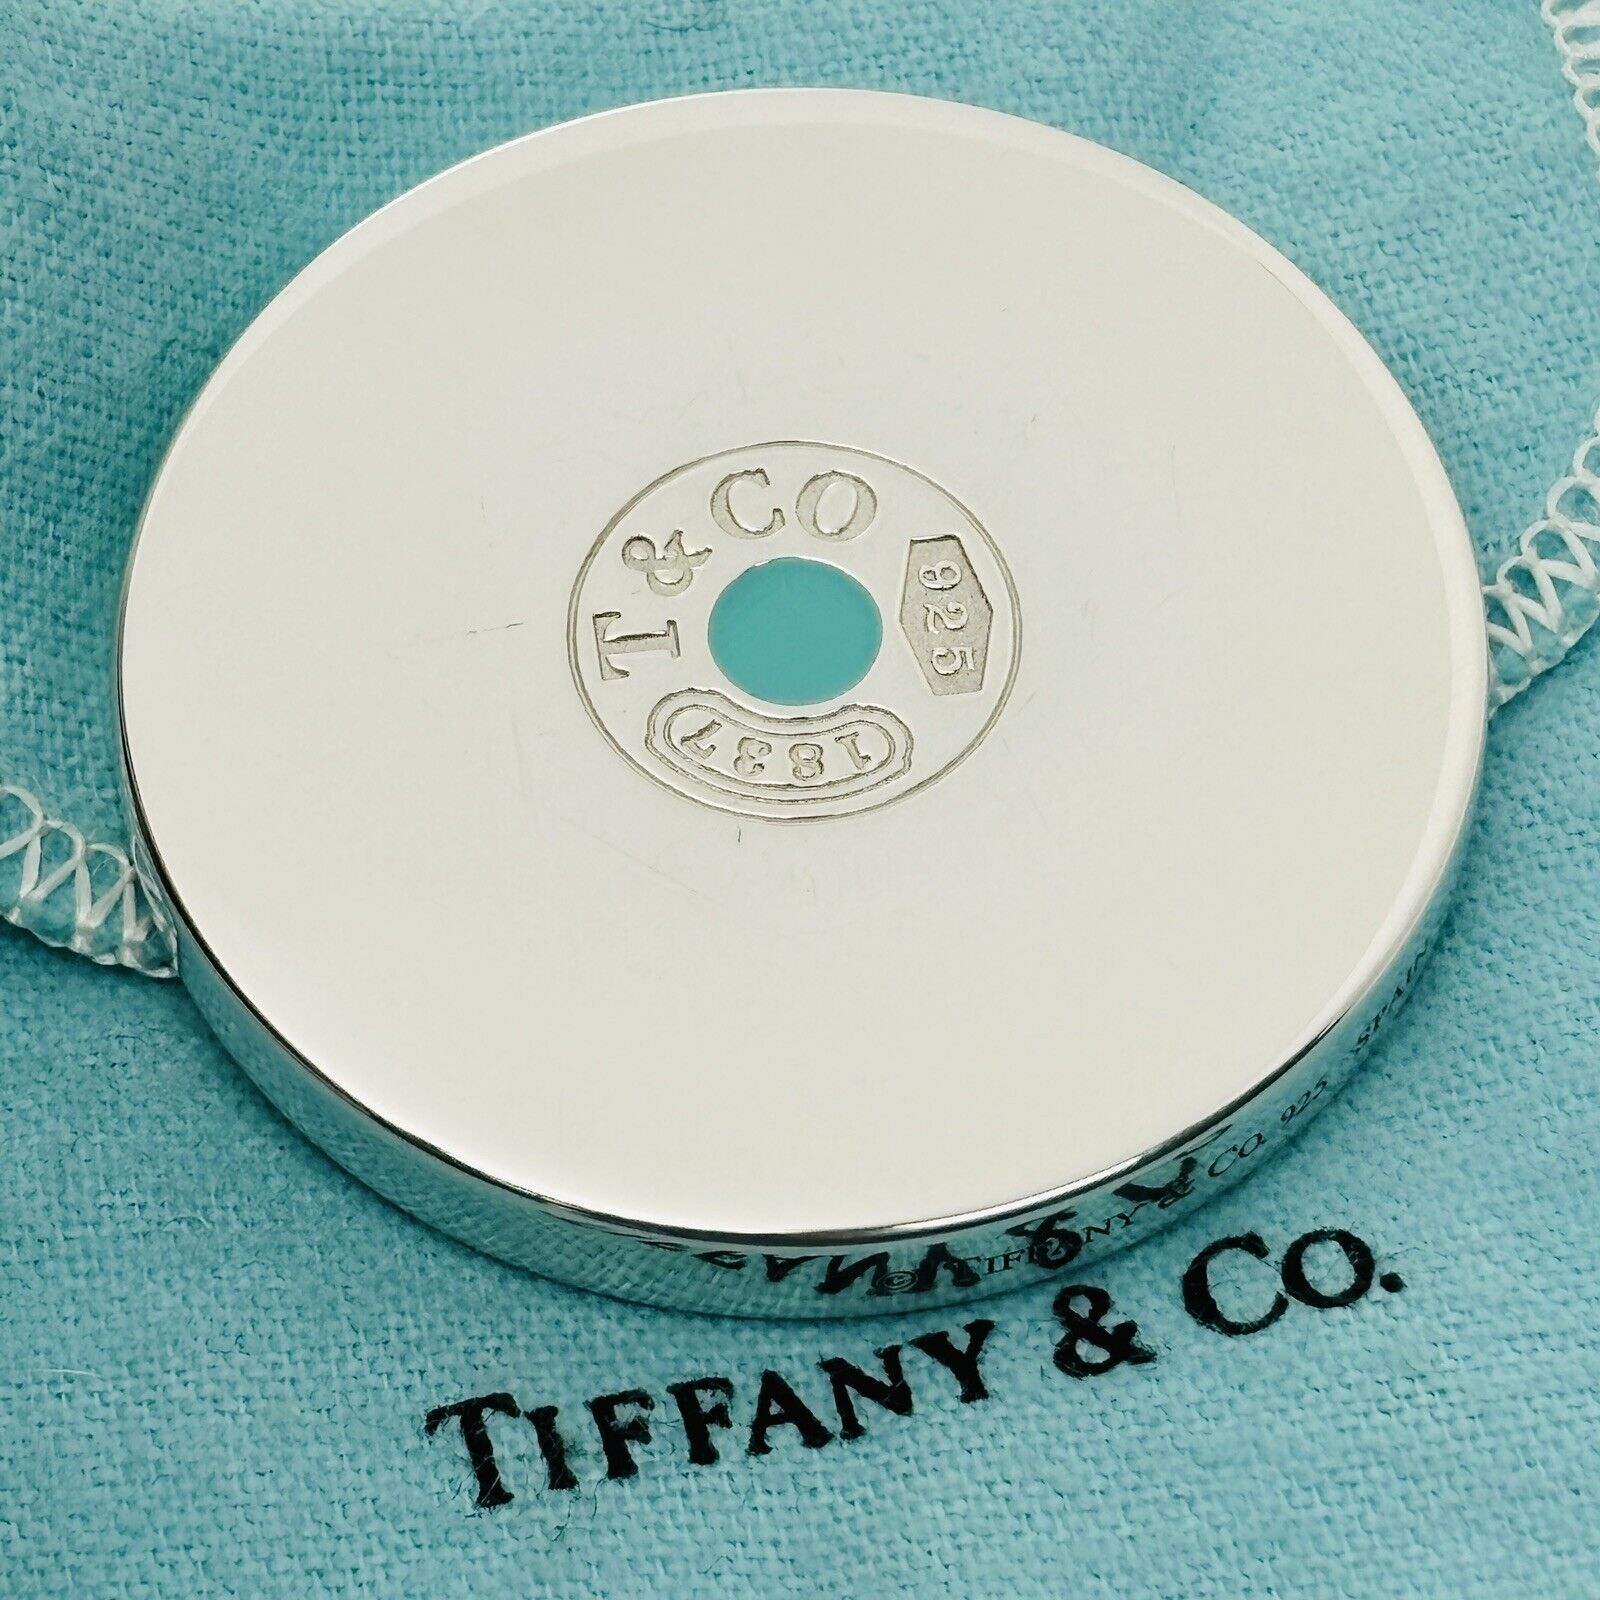 Tiffany & Co 1837 Compact Round Purse Mirror in Blue Enamel and Sterling Silver